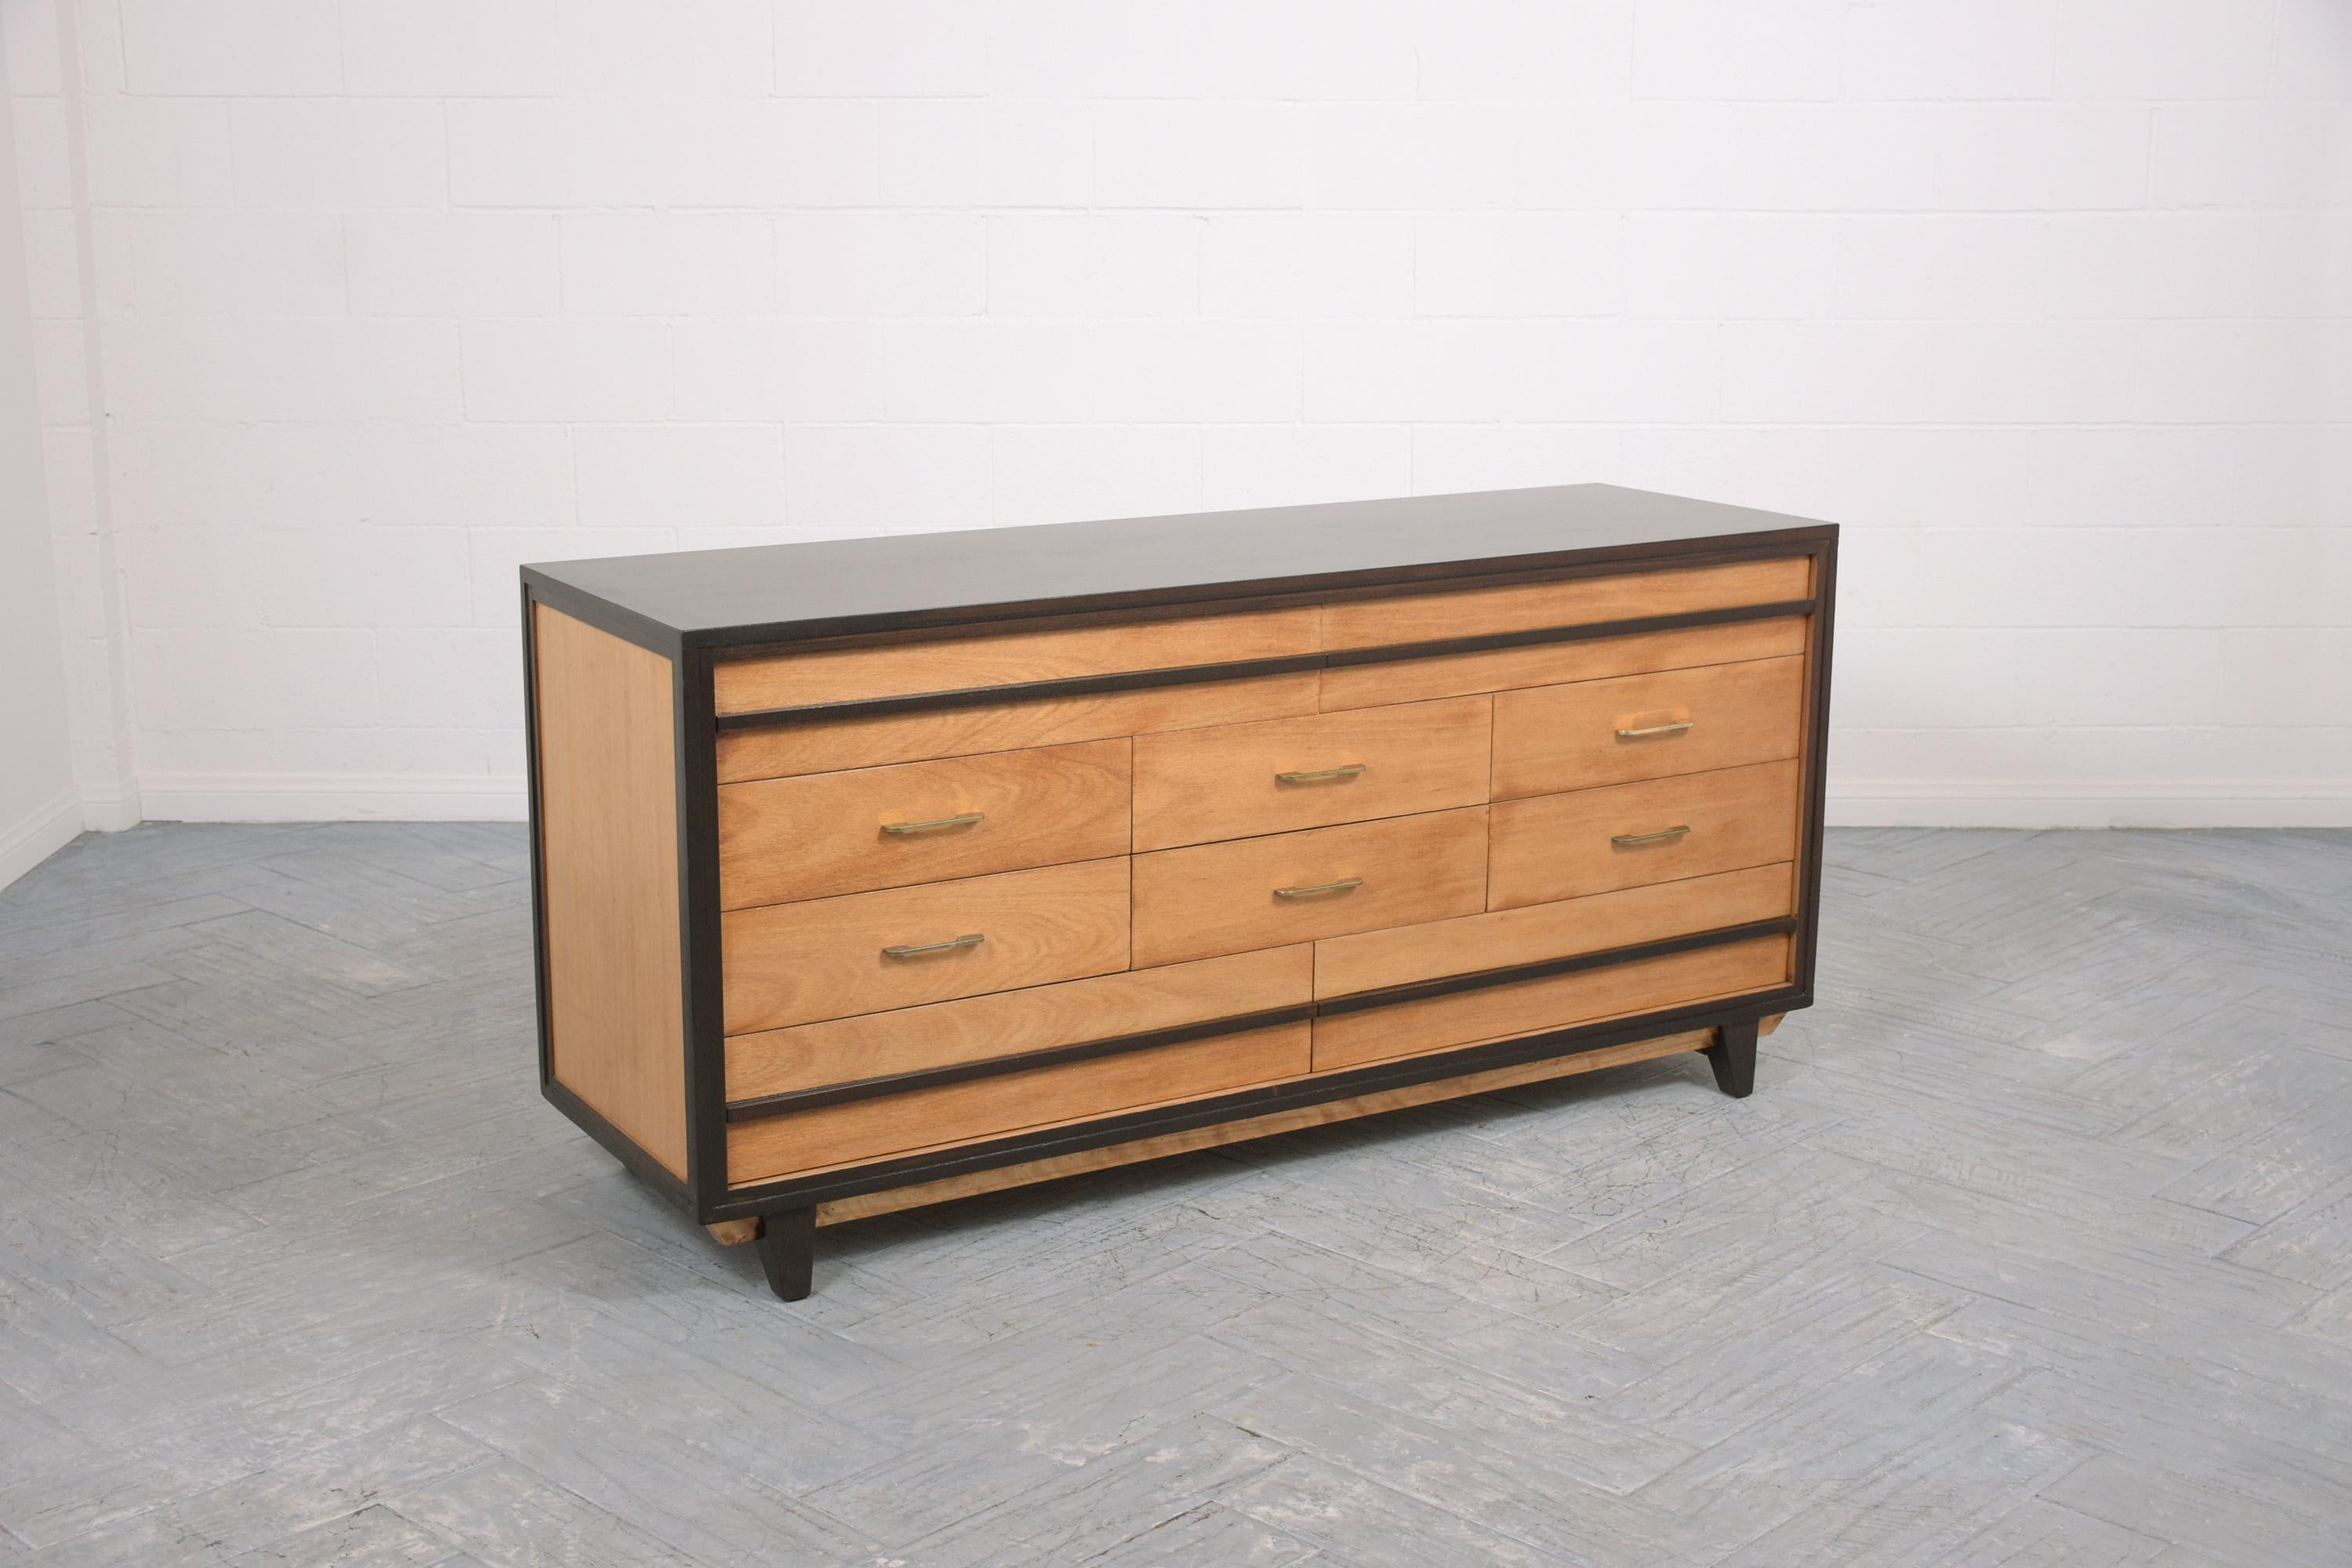 Steel Restored Vintage Mid-Century Modern Walnut Chest of Drawers with Brass Handles For Sale